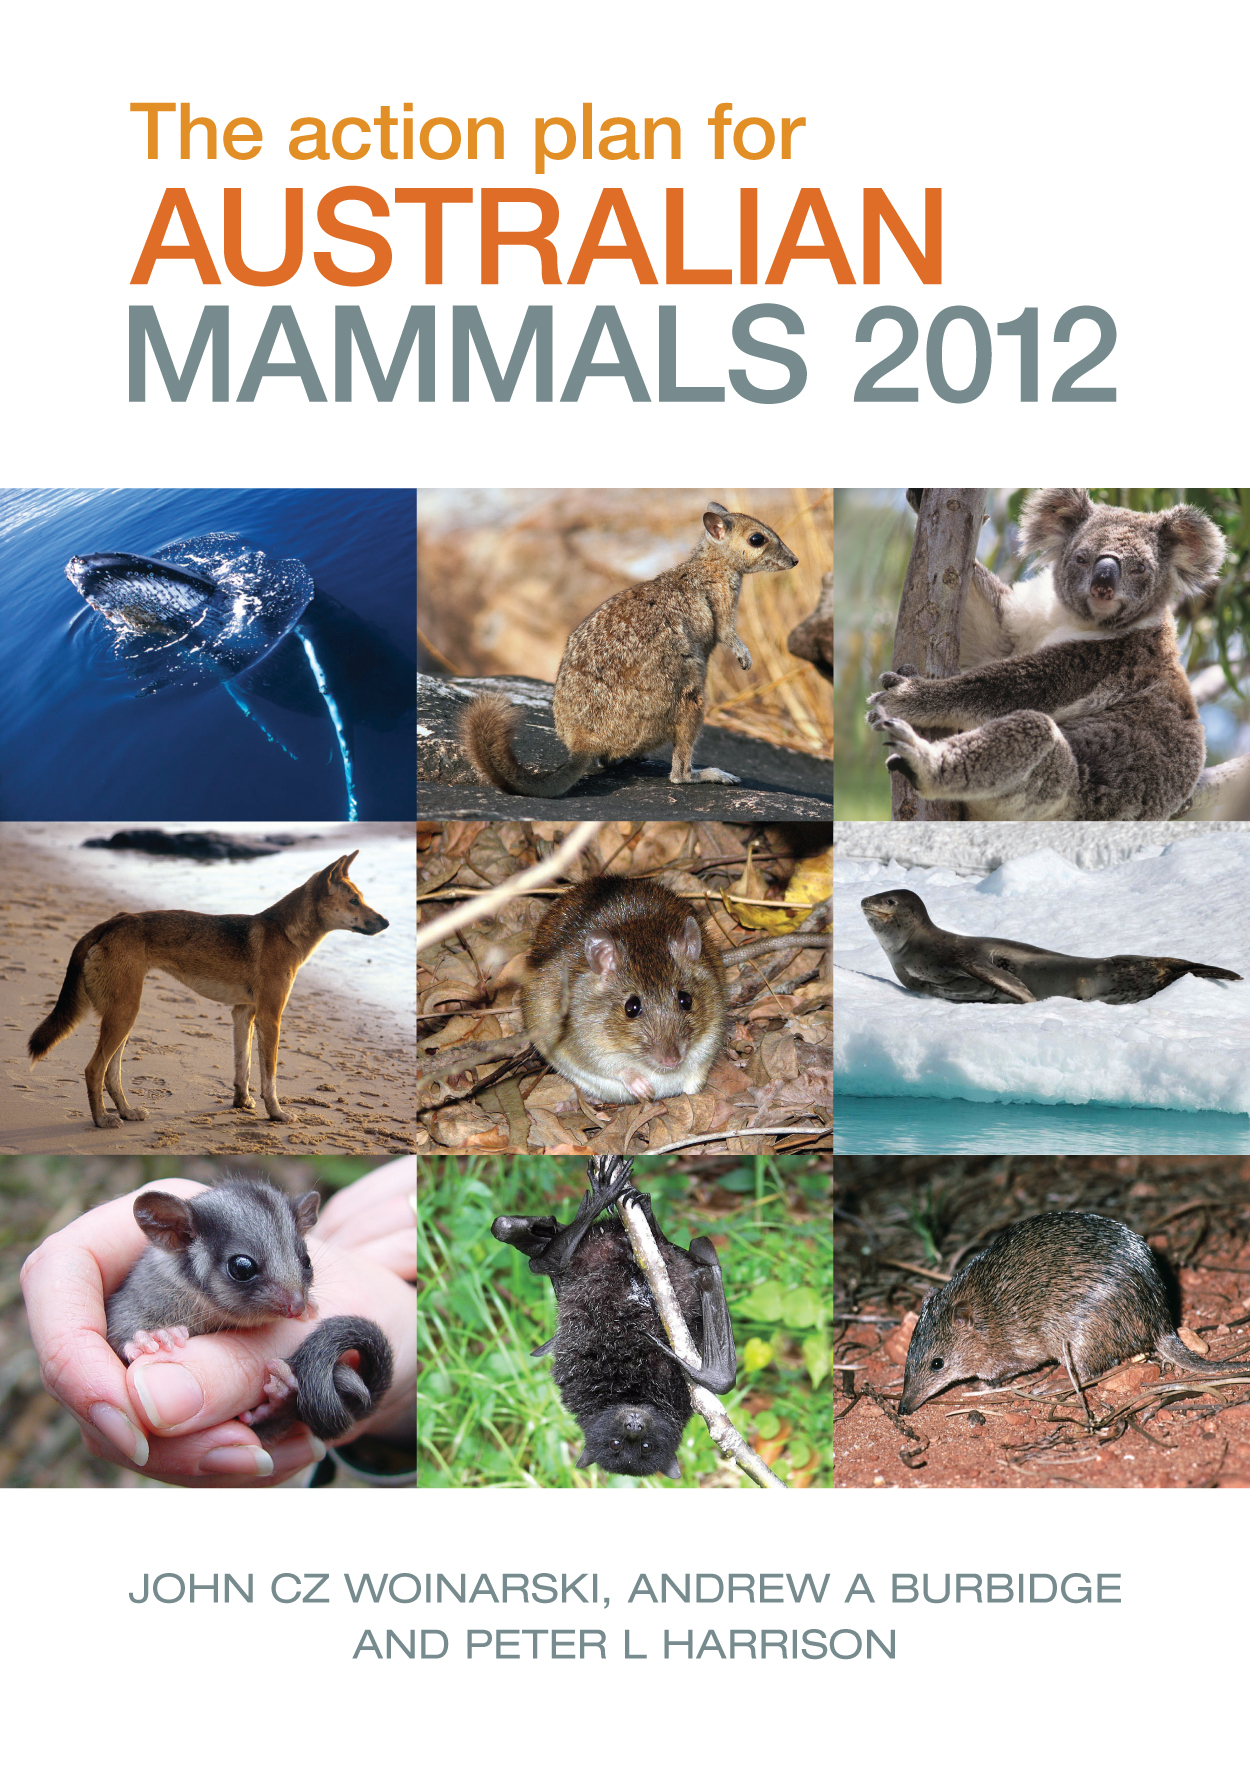 Cover is nine tiled images of Australian mammals.